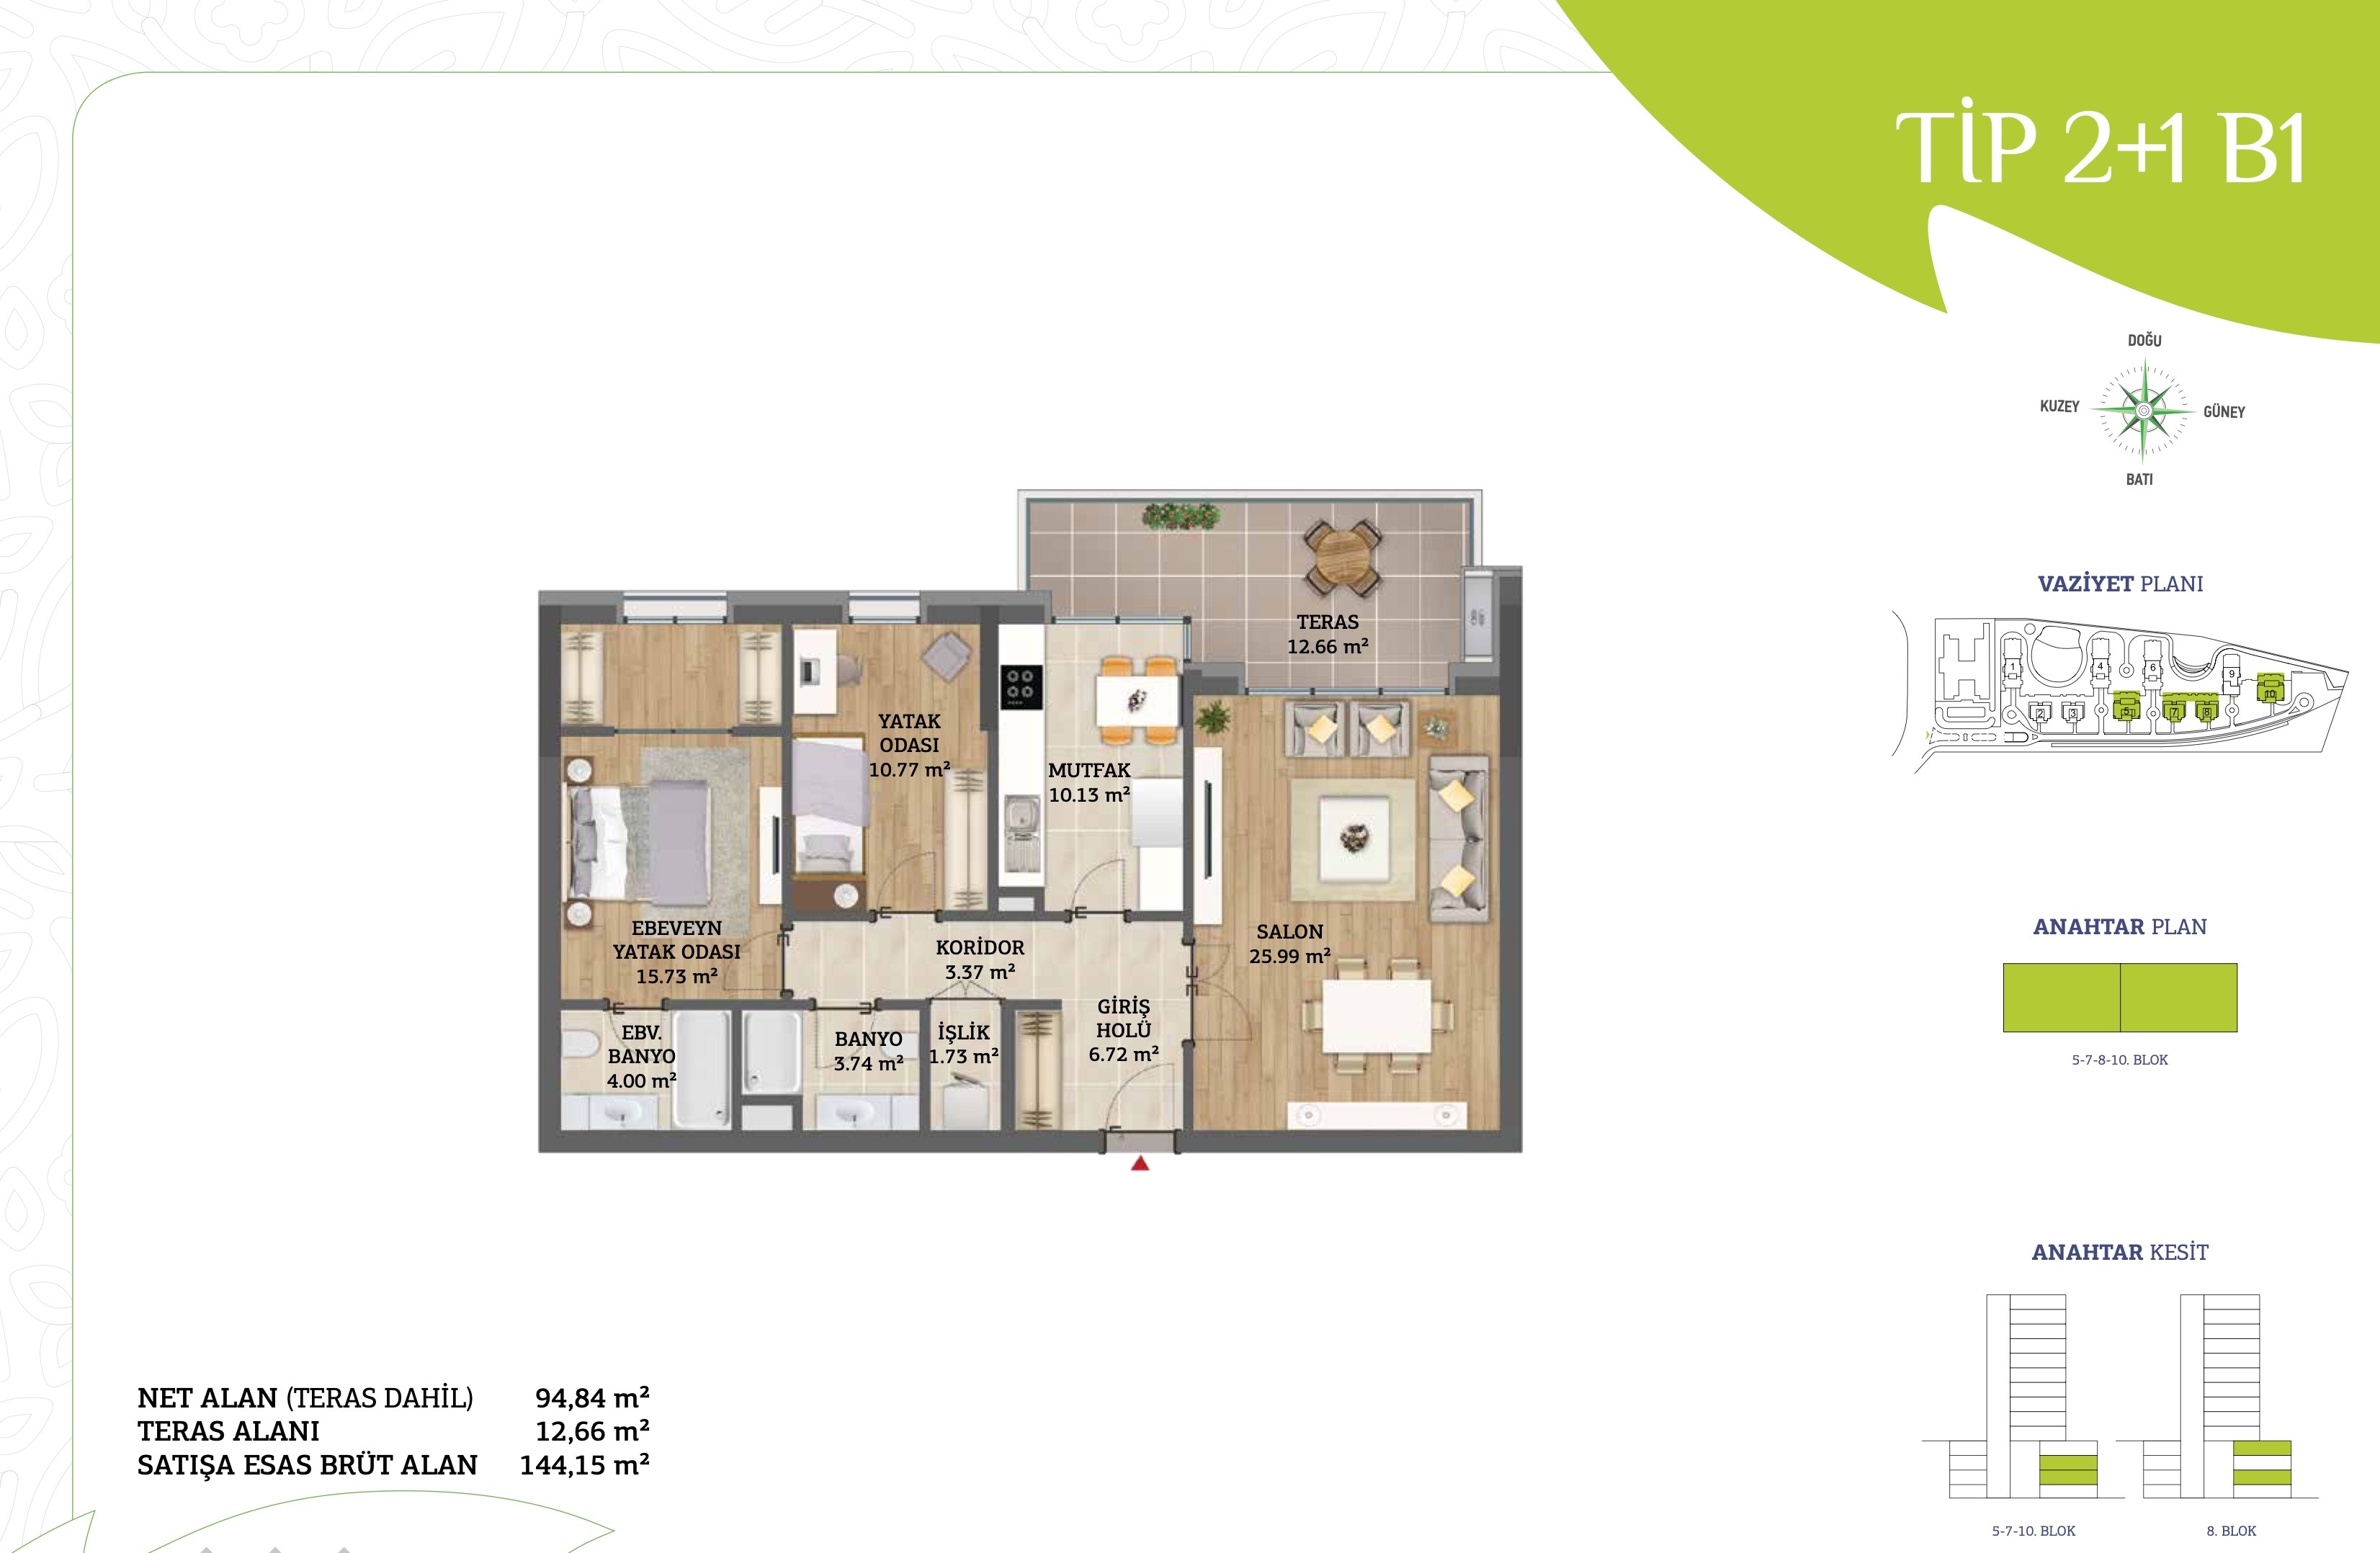 TWO-BEDROOM